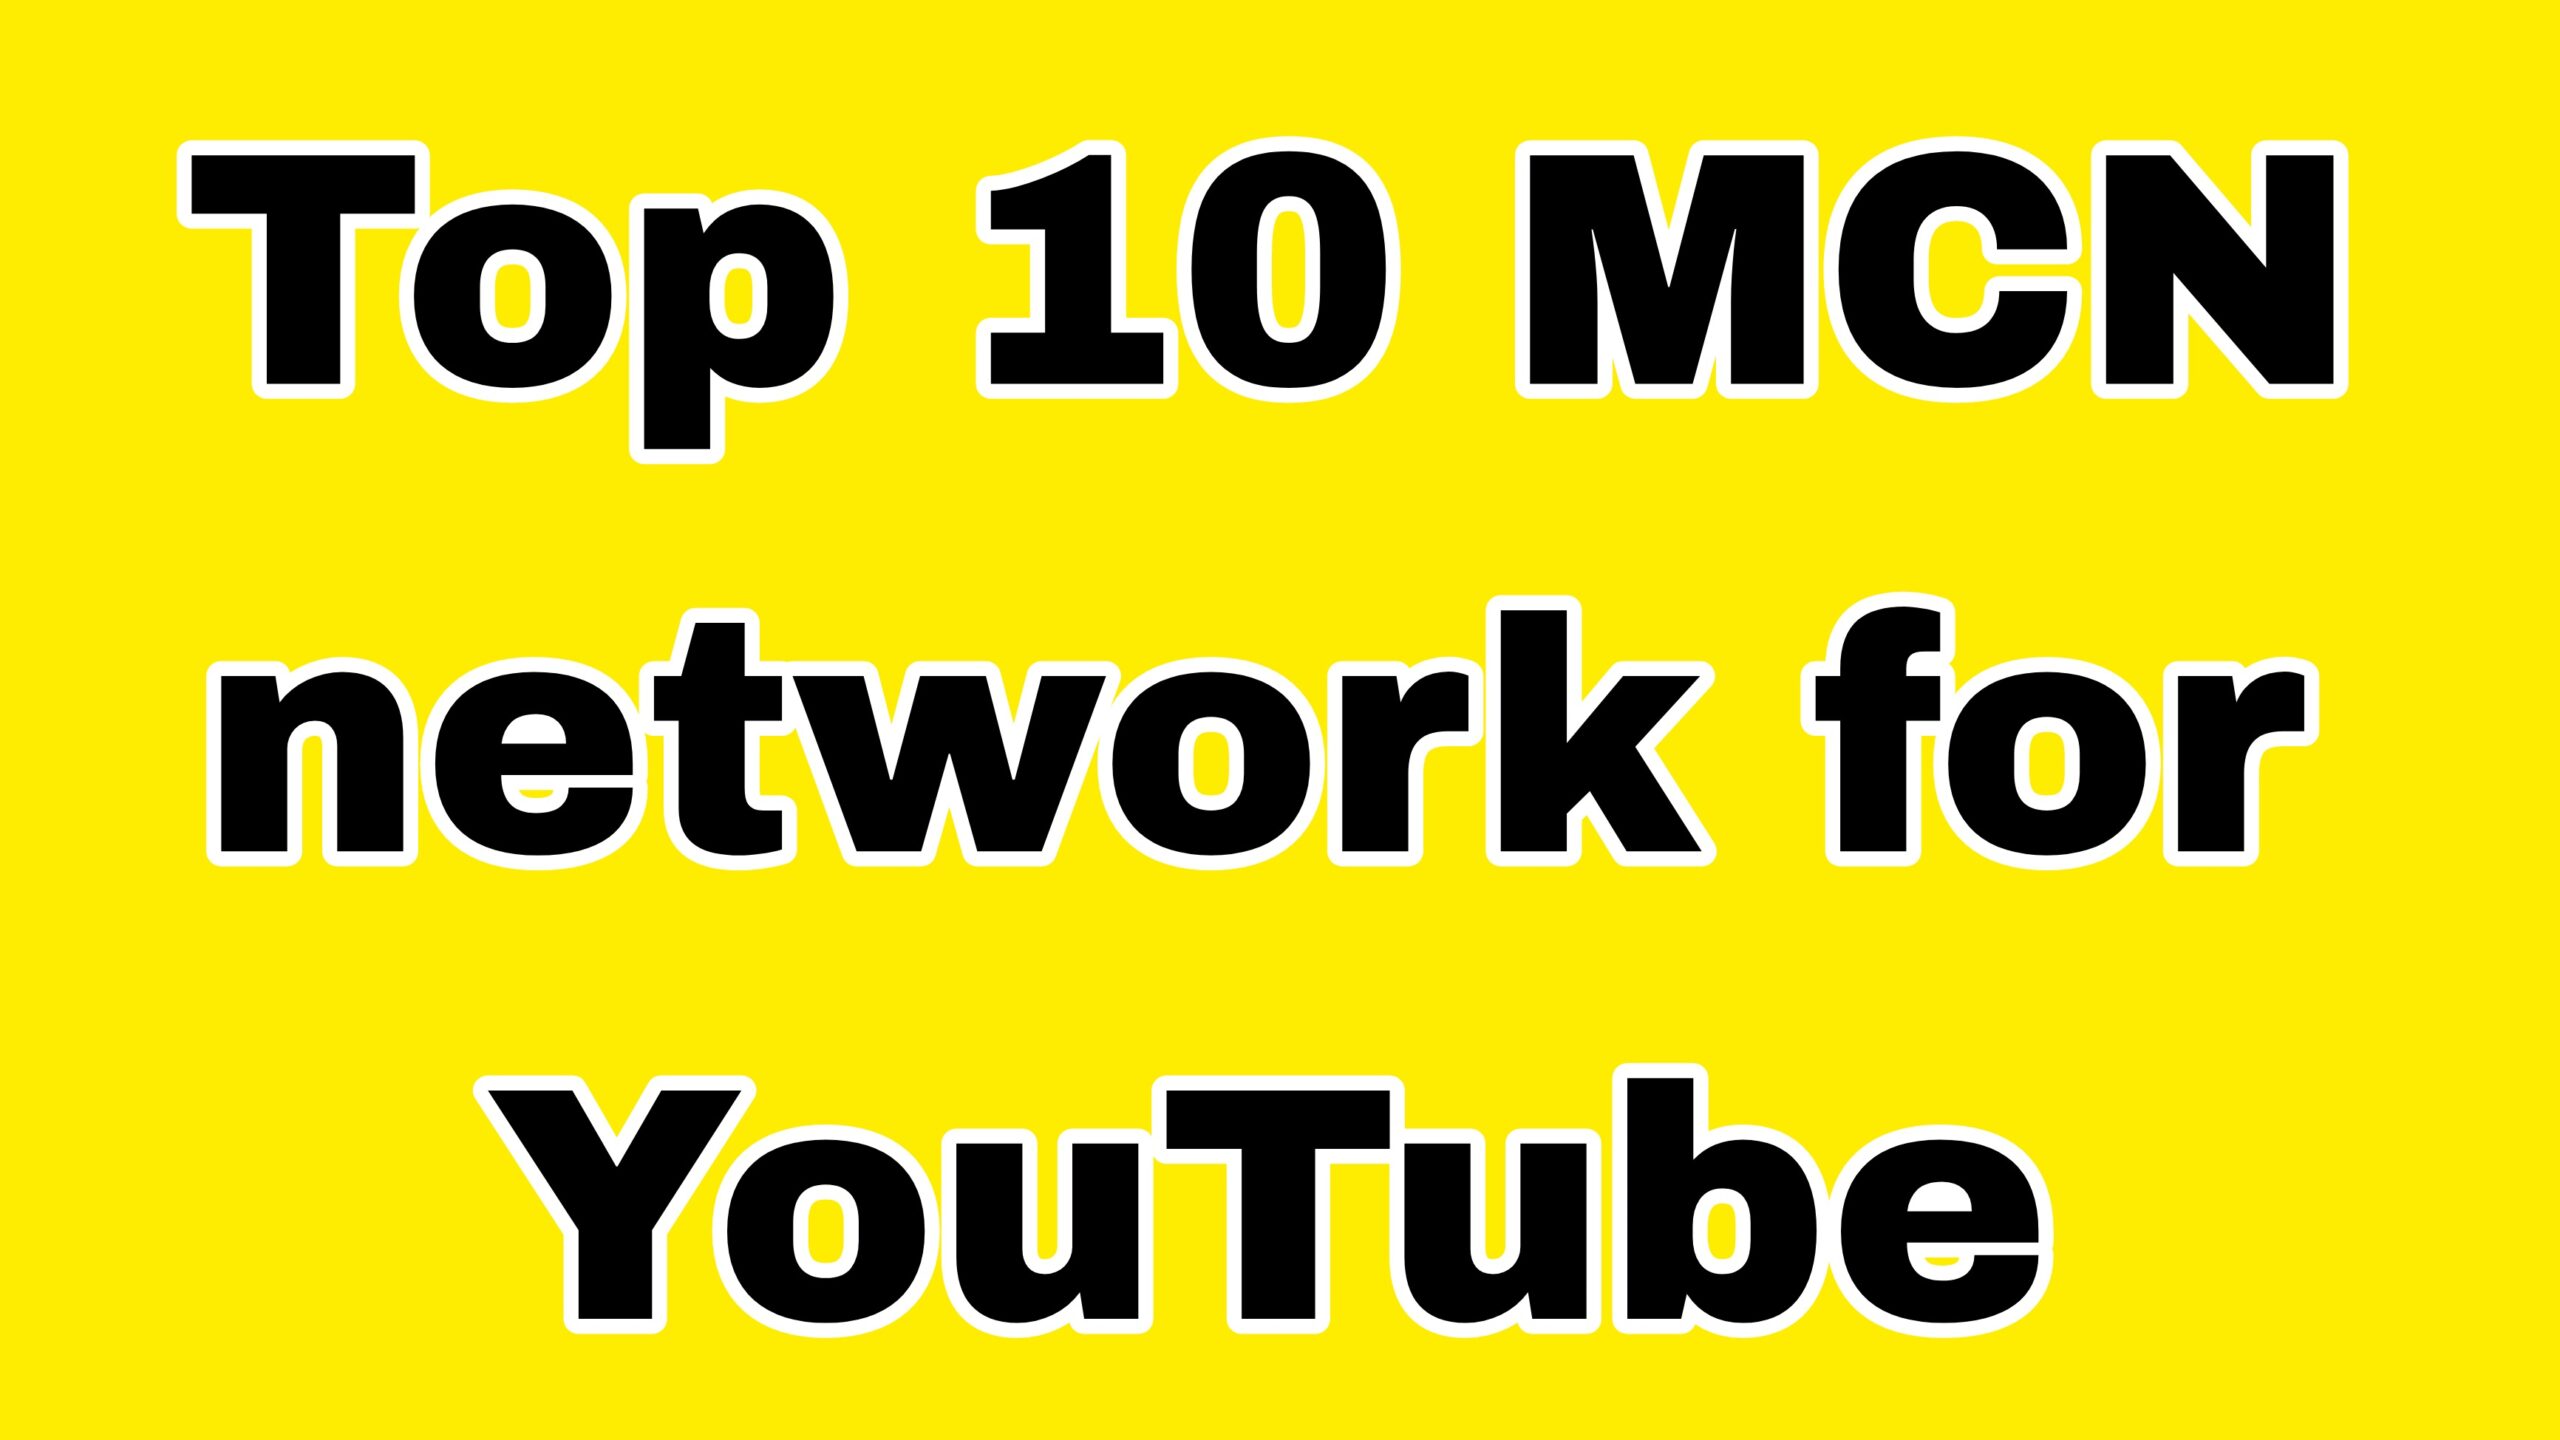 Top 10 MCN network for YouTube